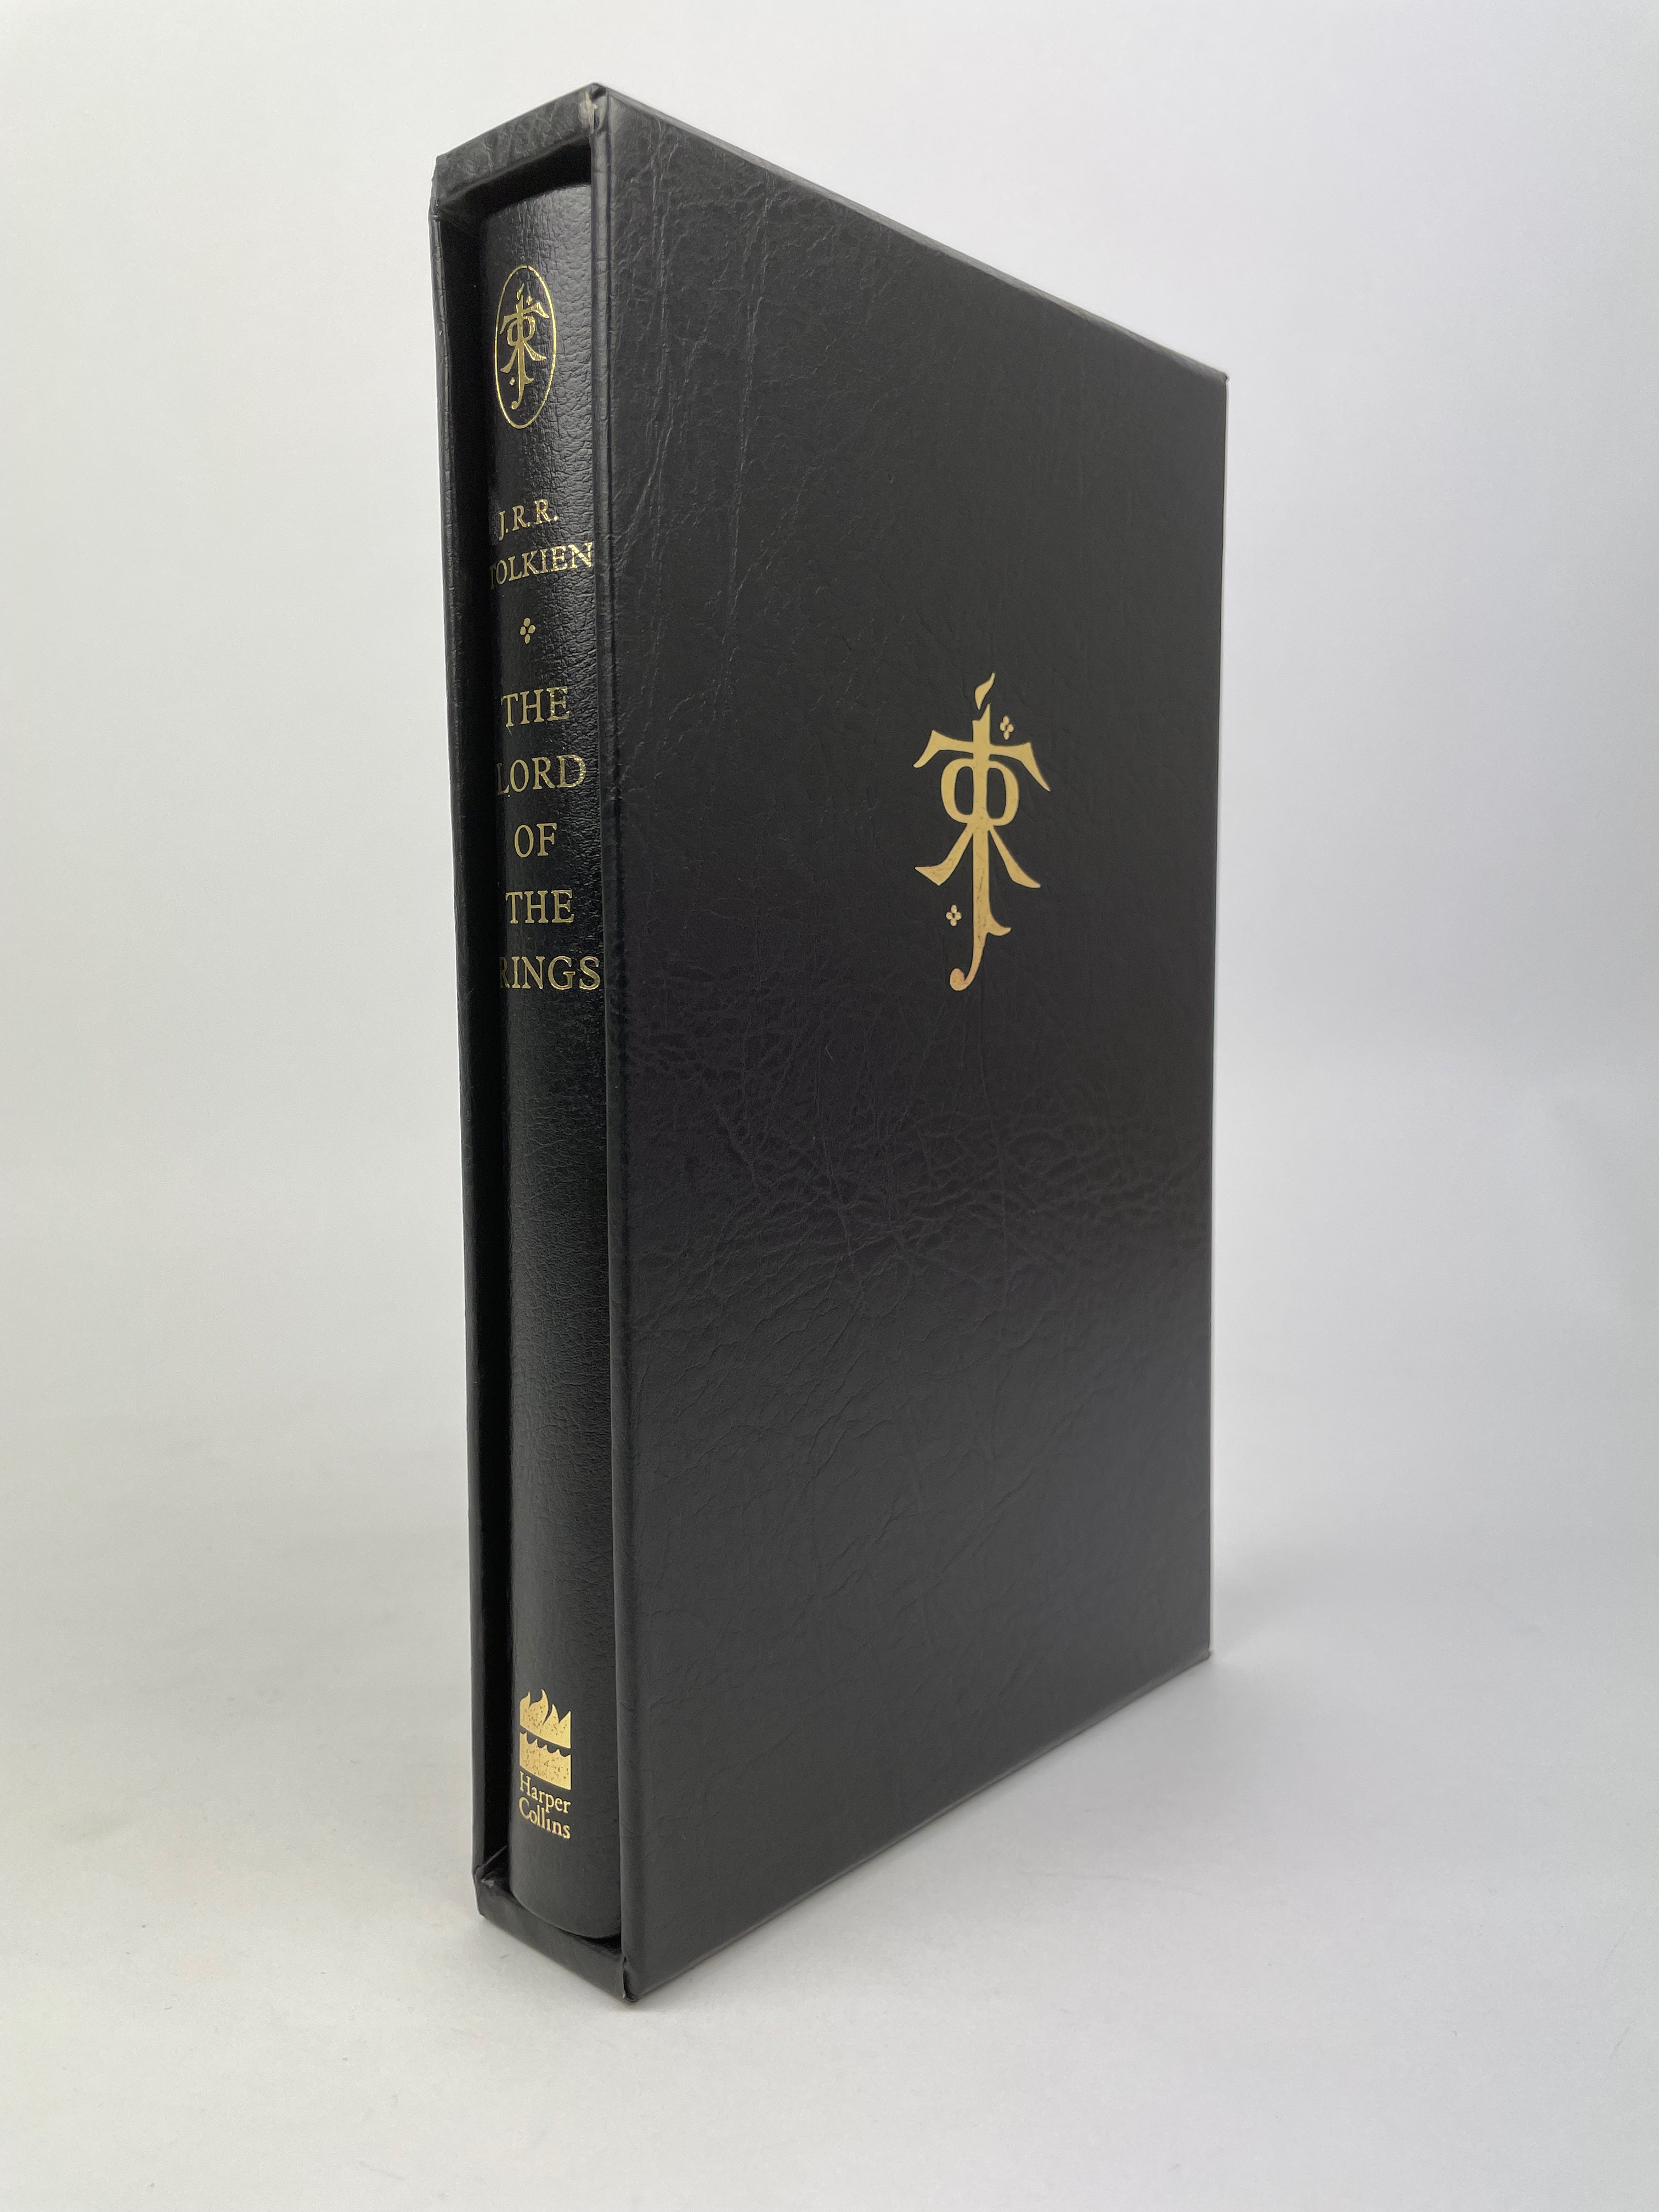 Black Leather The Lord of the Rings by Harper Collins Publishers, the 4th printing of the 1997 Deluxe Limited Edition, printed in 2002 fourth impression